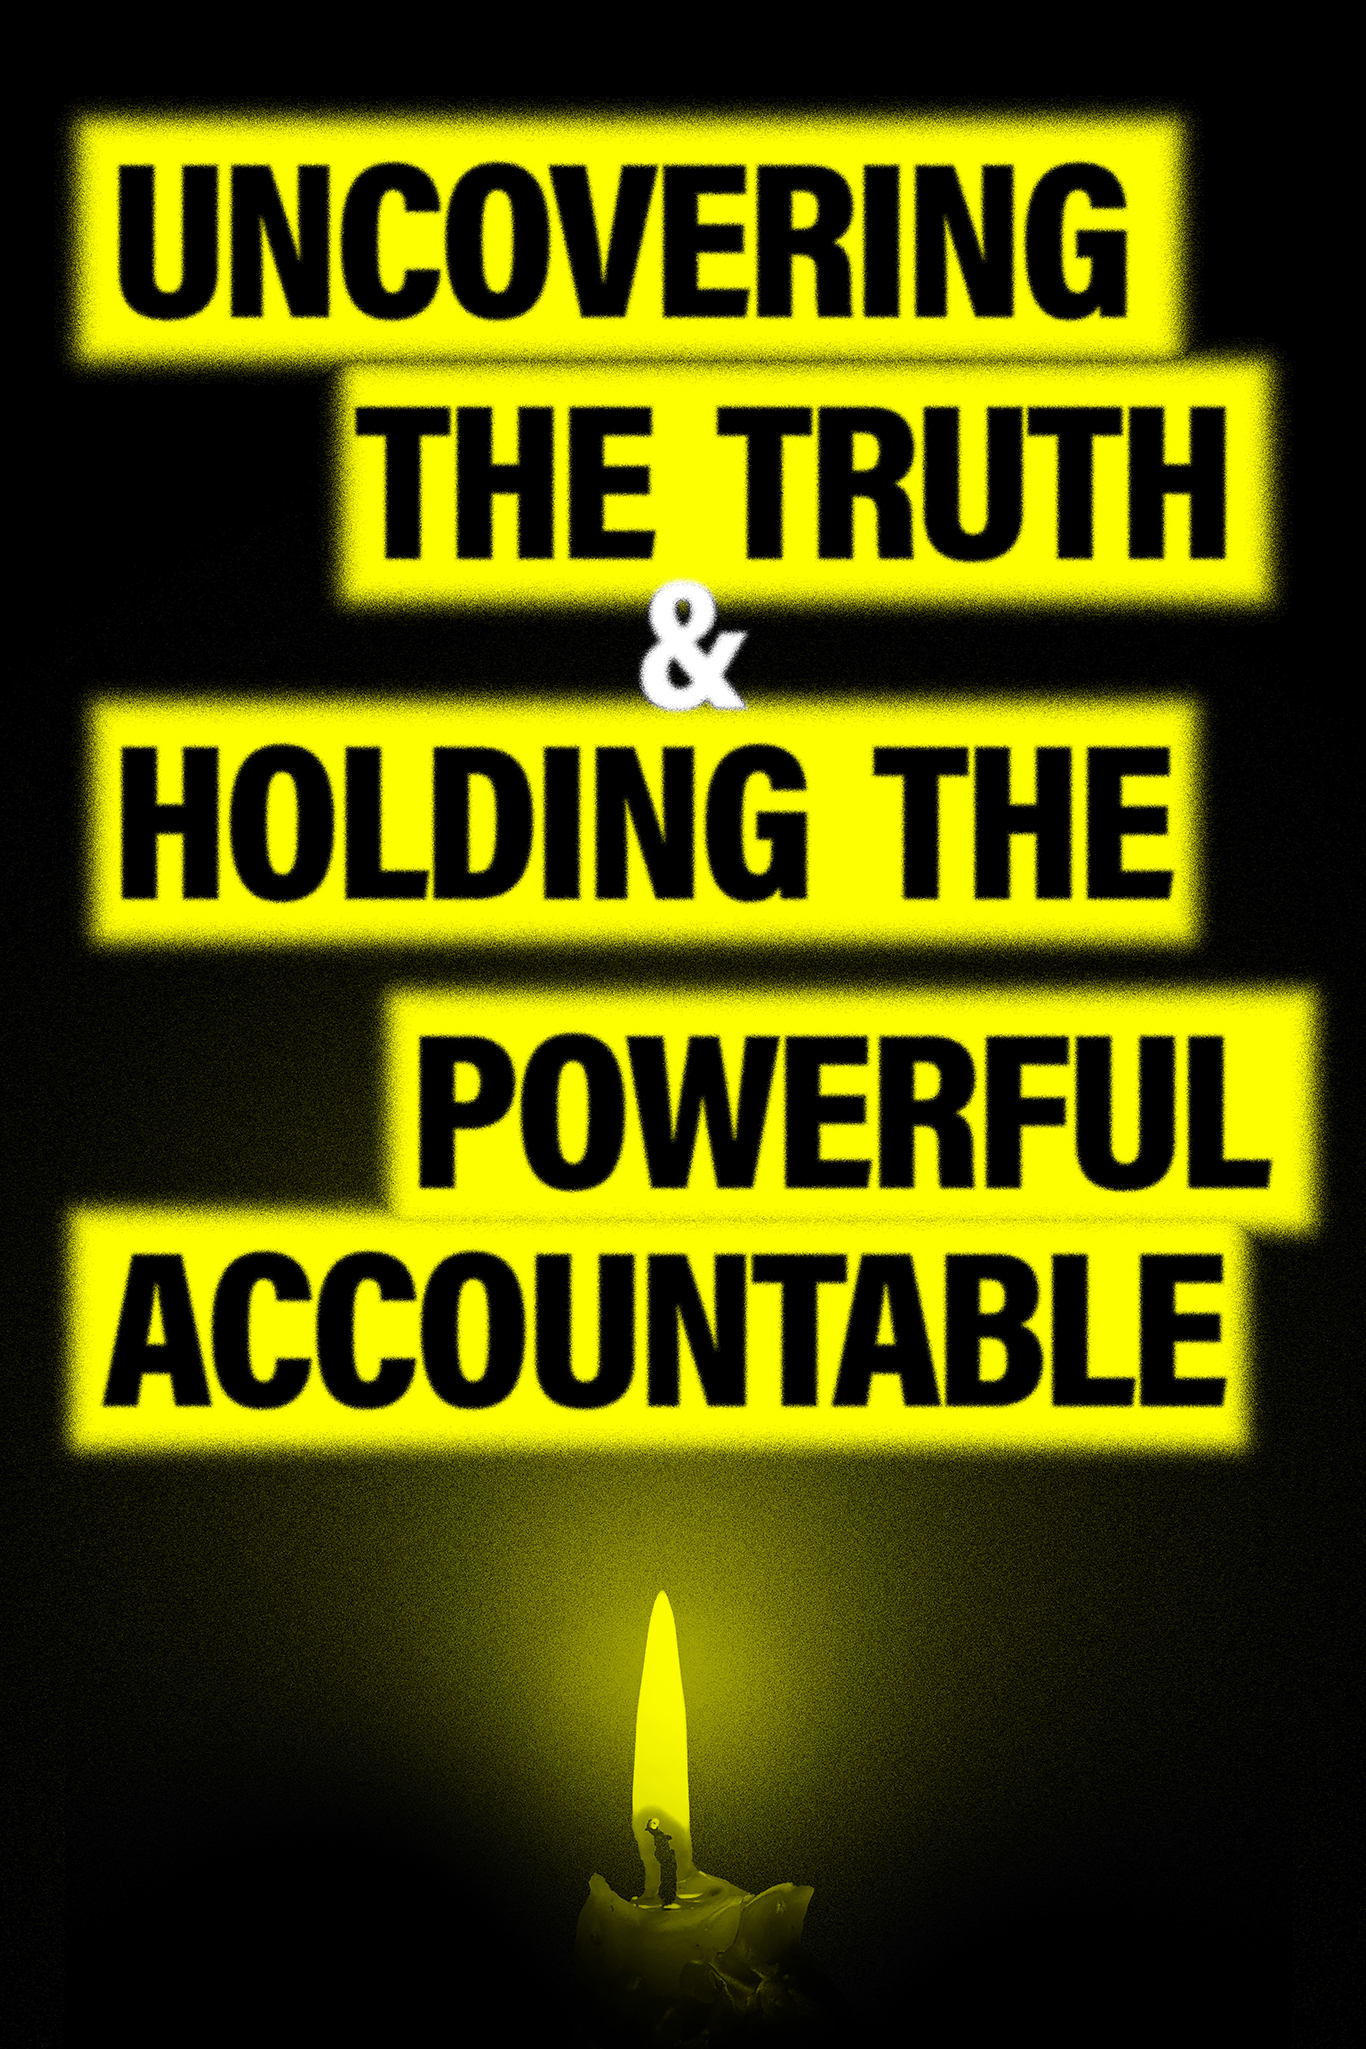 A black poster with yellow text that reads “uncovering the truth & holding the powerful accountable” and a lit candle.